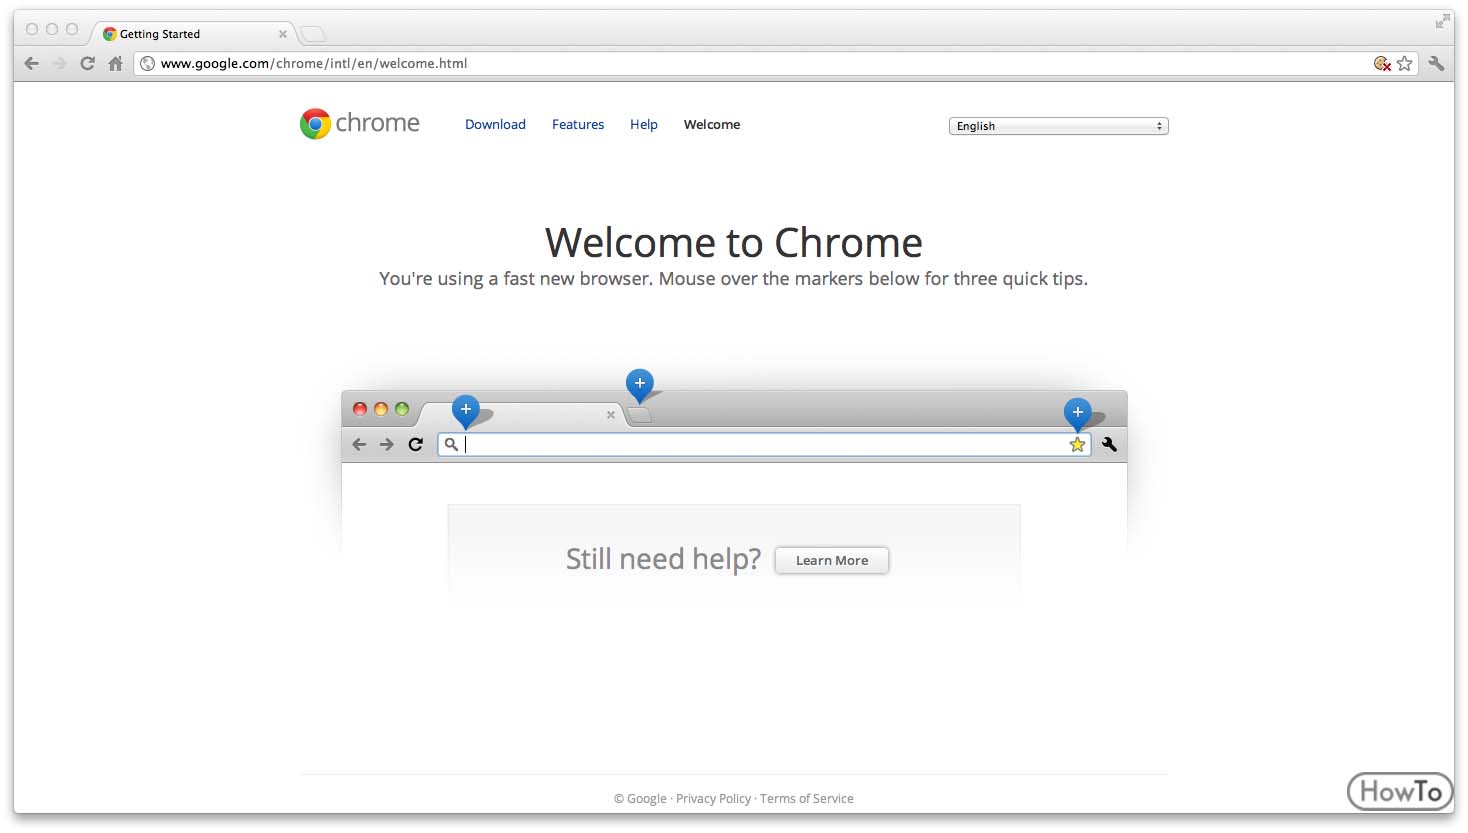 google chrome backgrounds extension